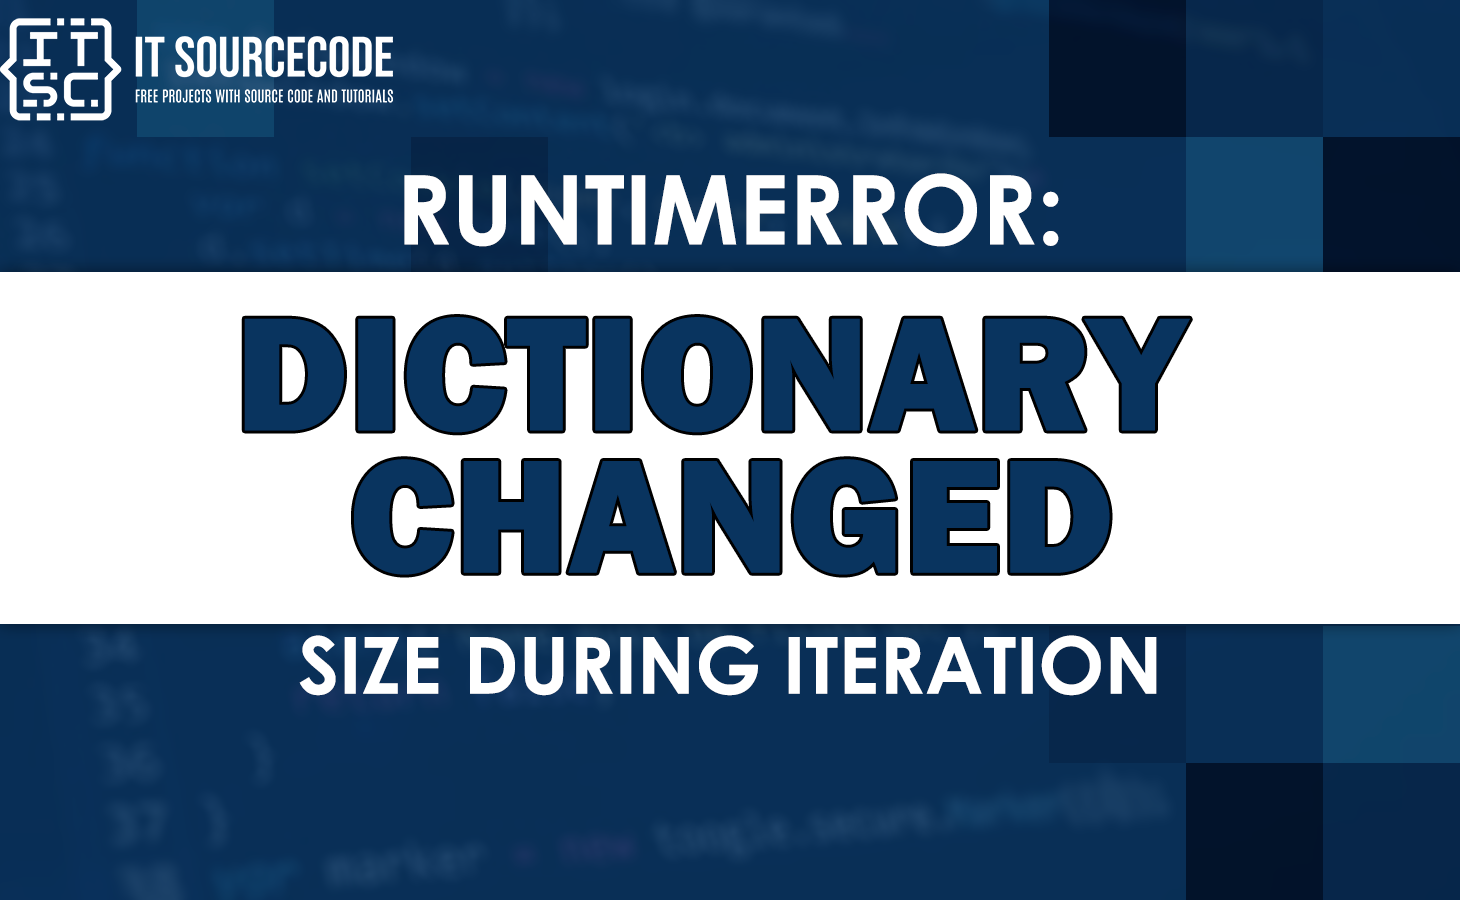 Runtimeerror dictionary changed size during iteration